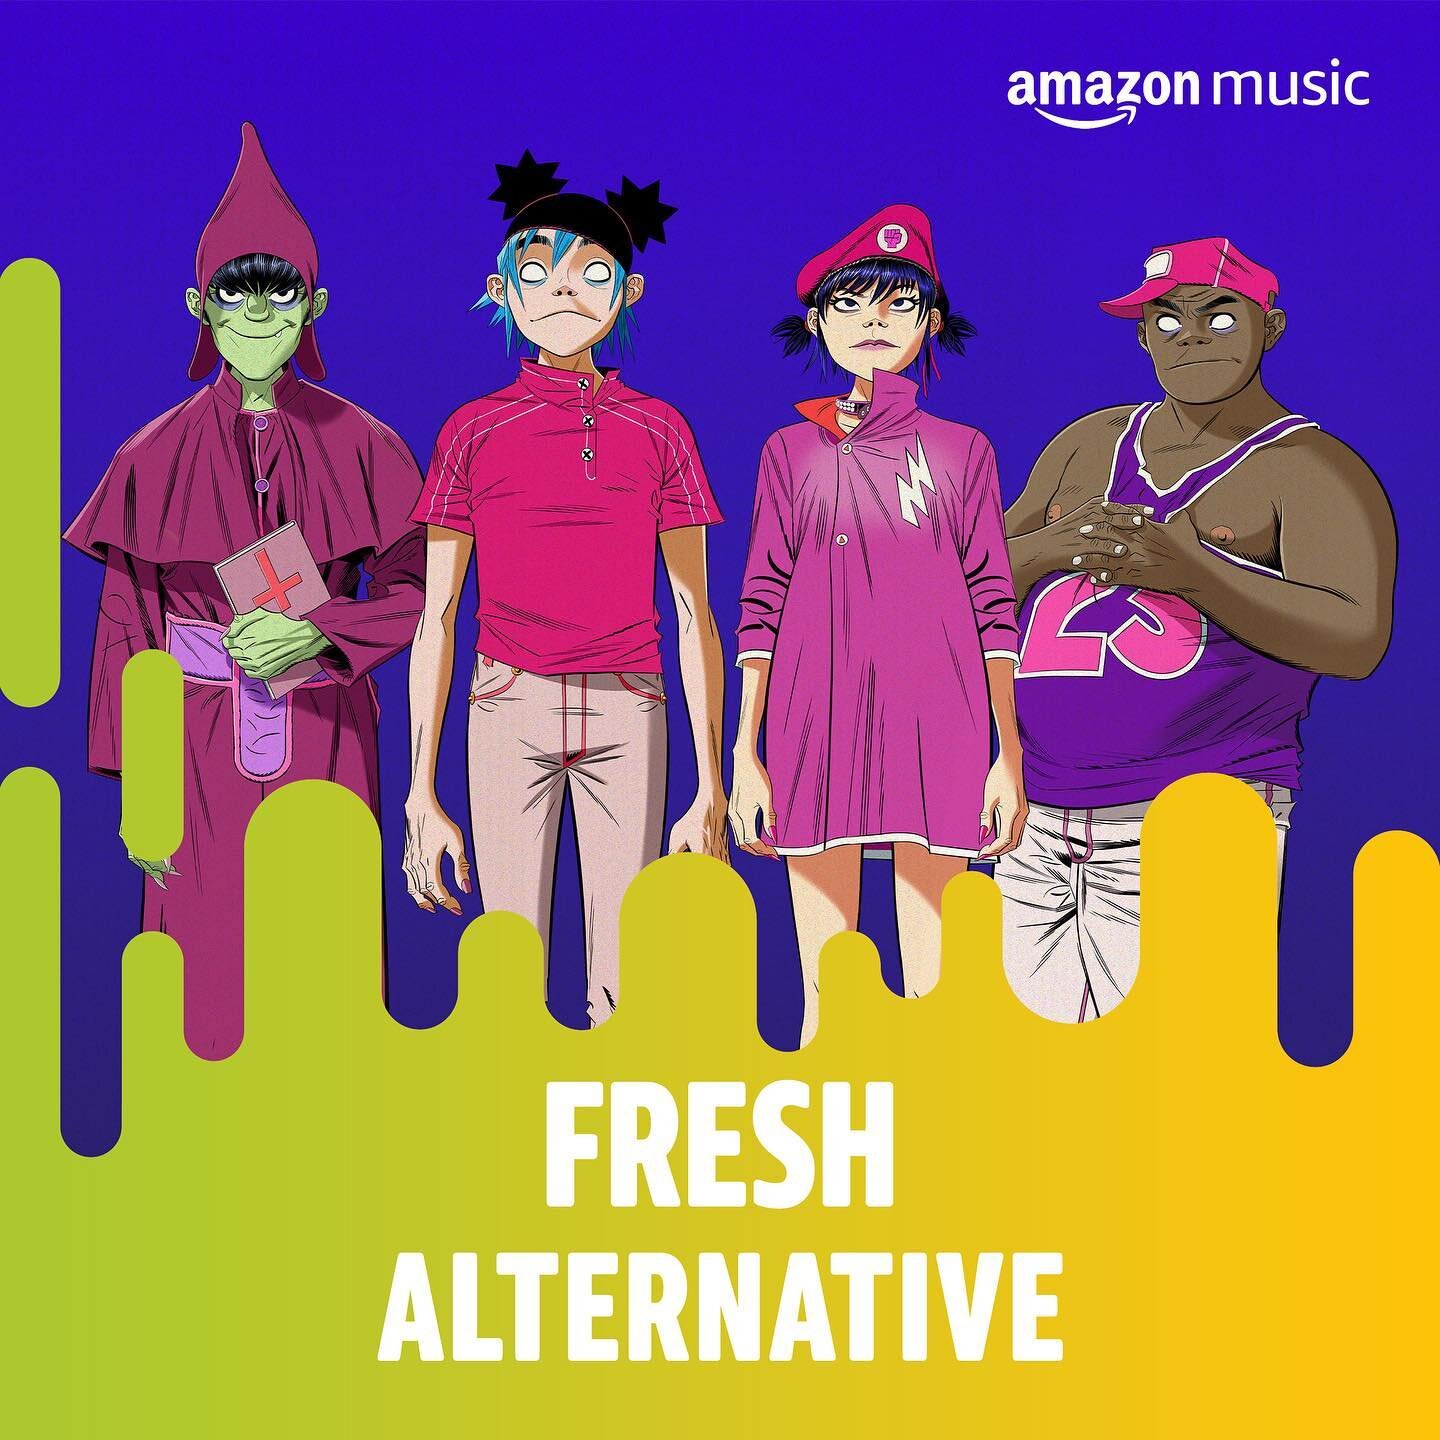 Check out my latest single, Line in the Dirt, on Amazon Music&rsquo;s Fresh Alternative and Fresh Rock playlists. Thanks for the continued support @amazonmusic